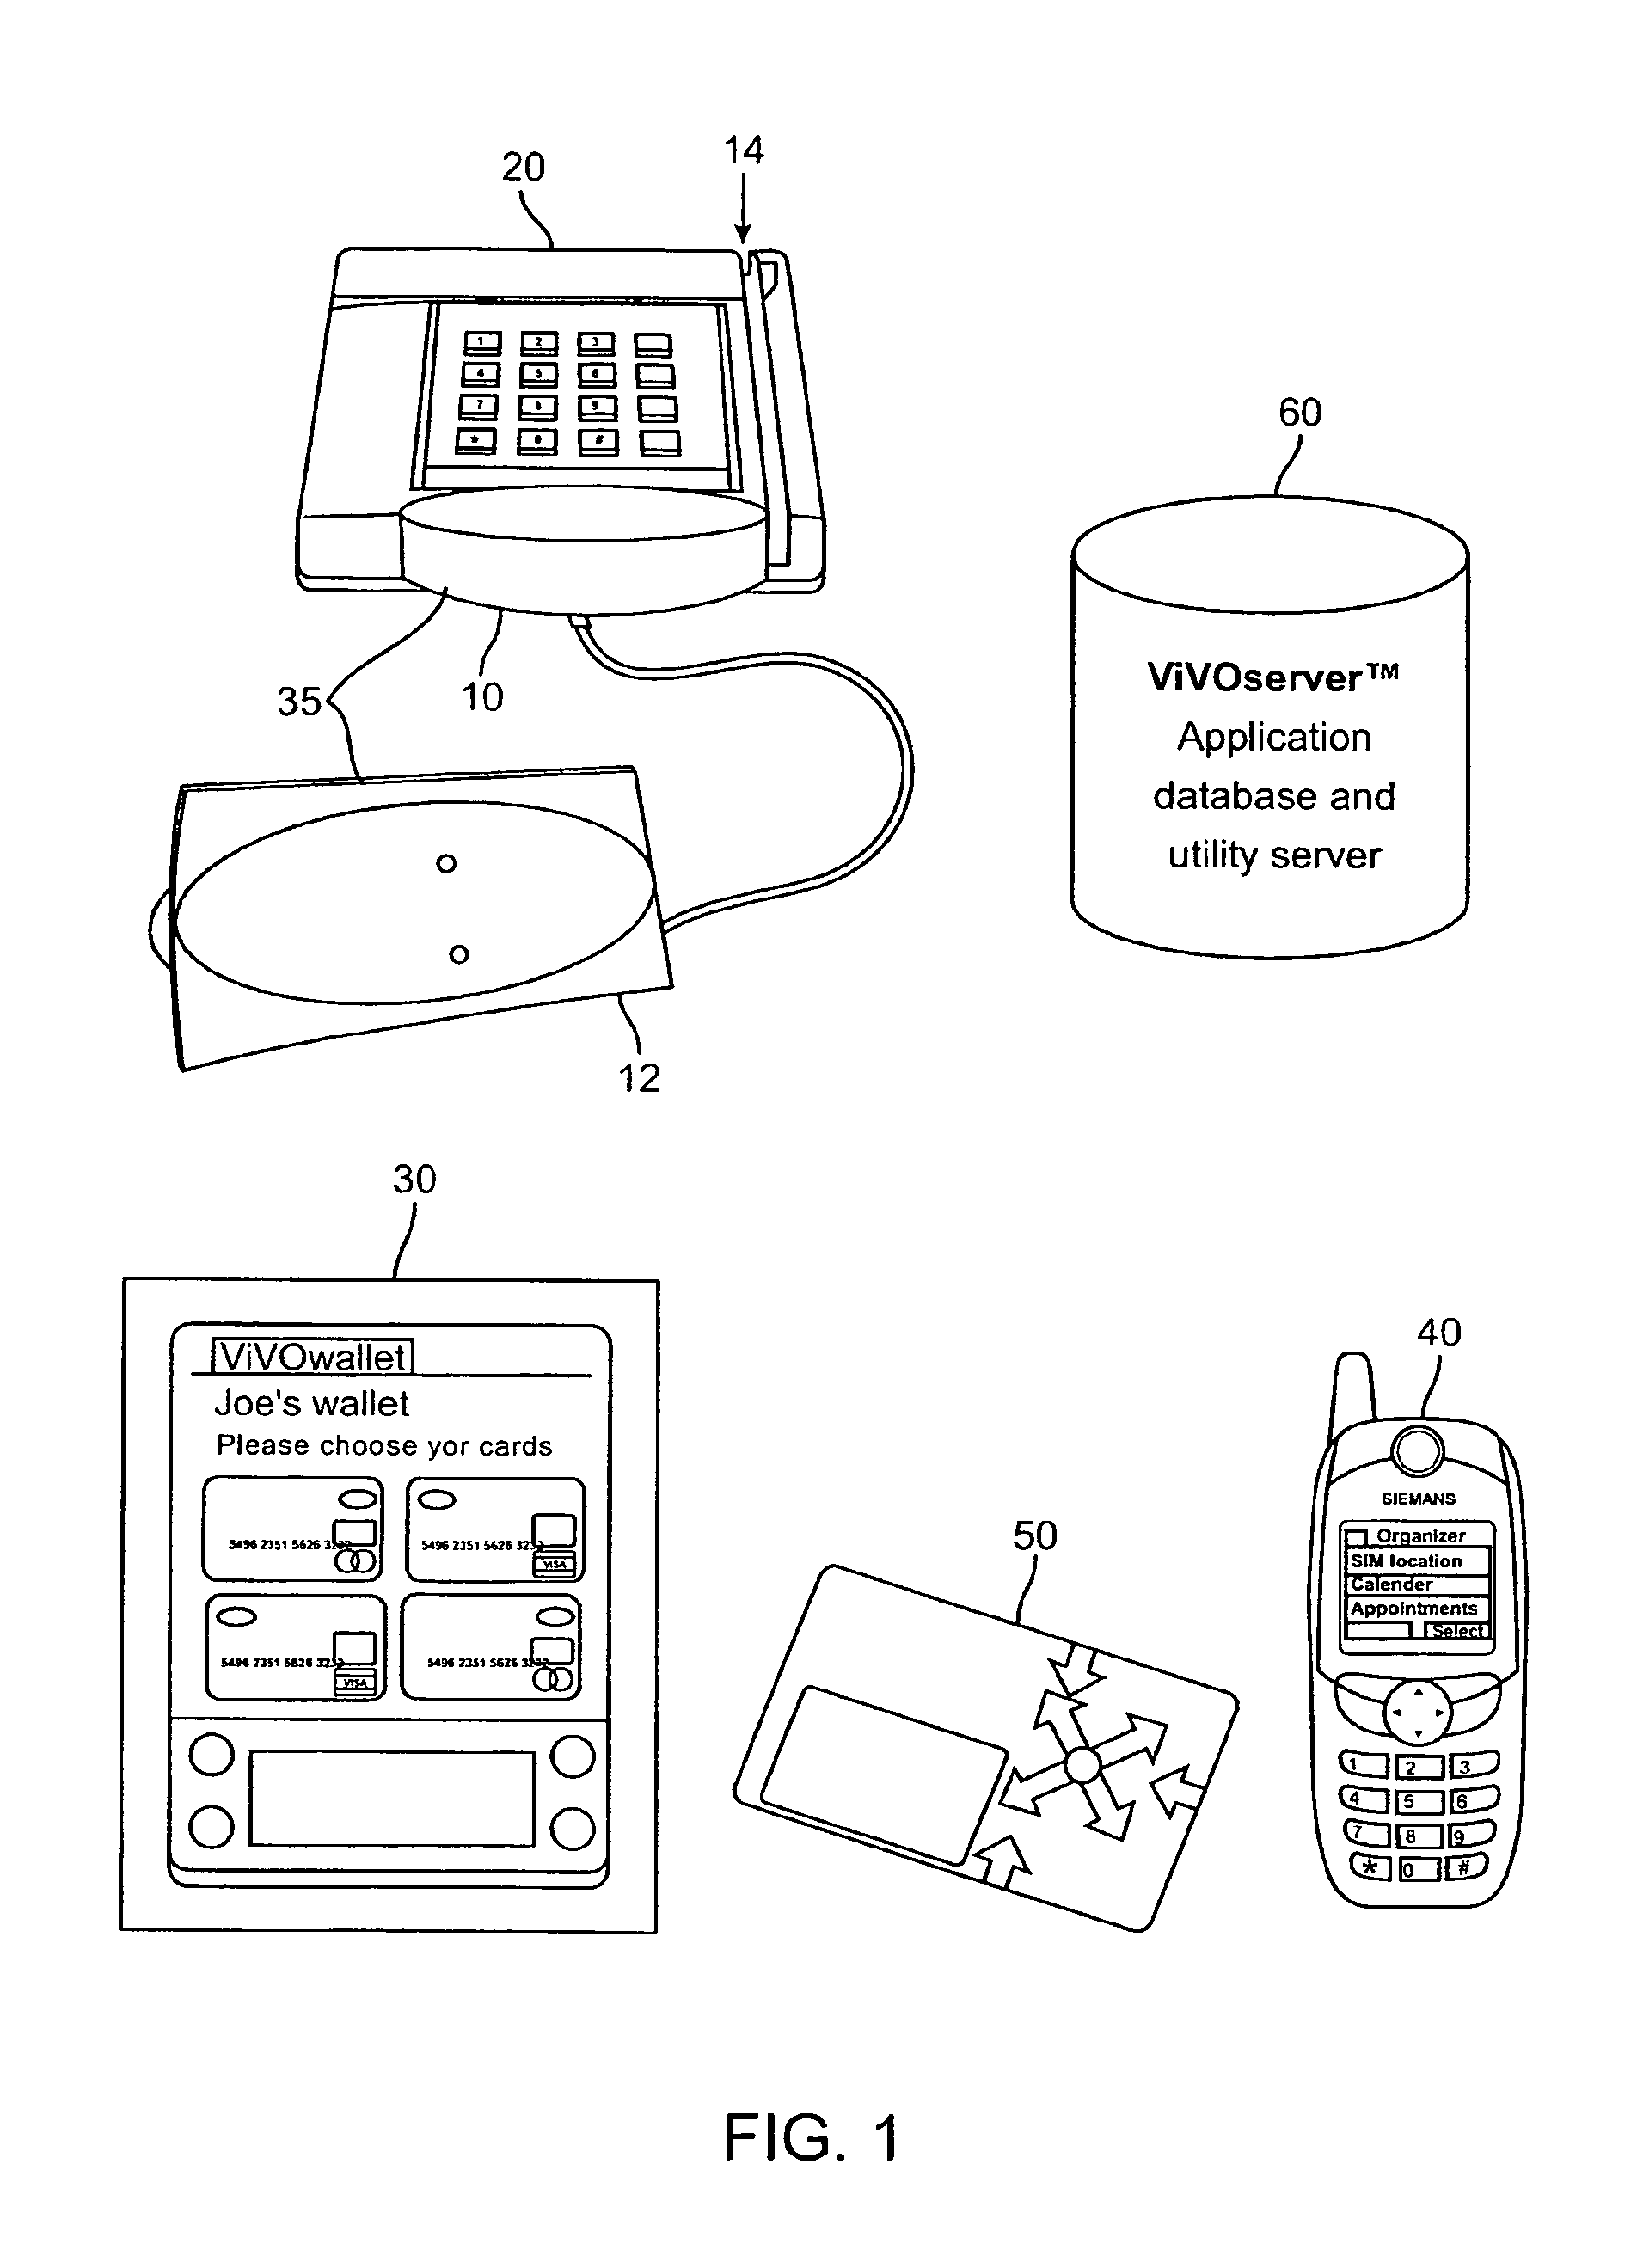 Collaborative negotiation techniques for mobile personal trusted device financial transactions